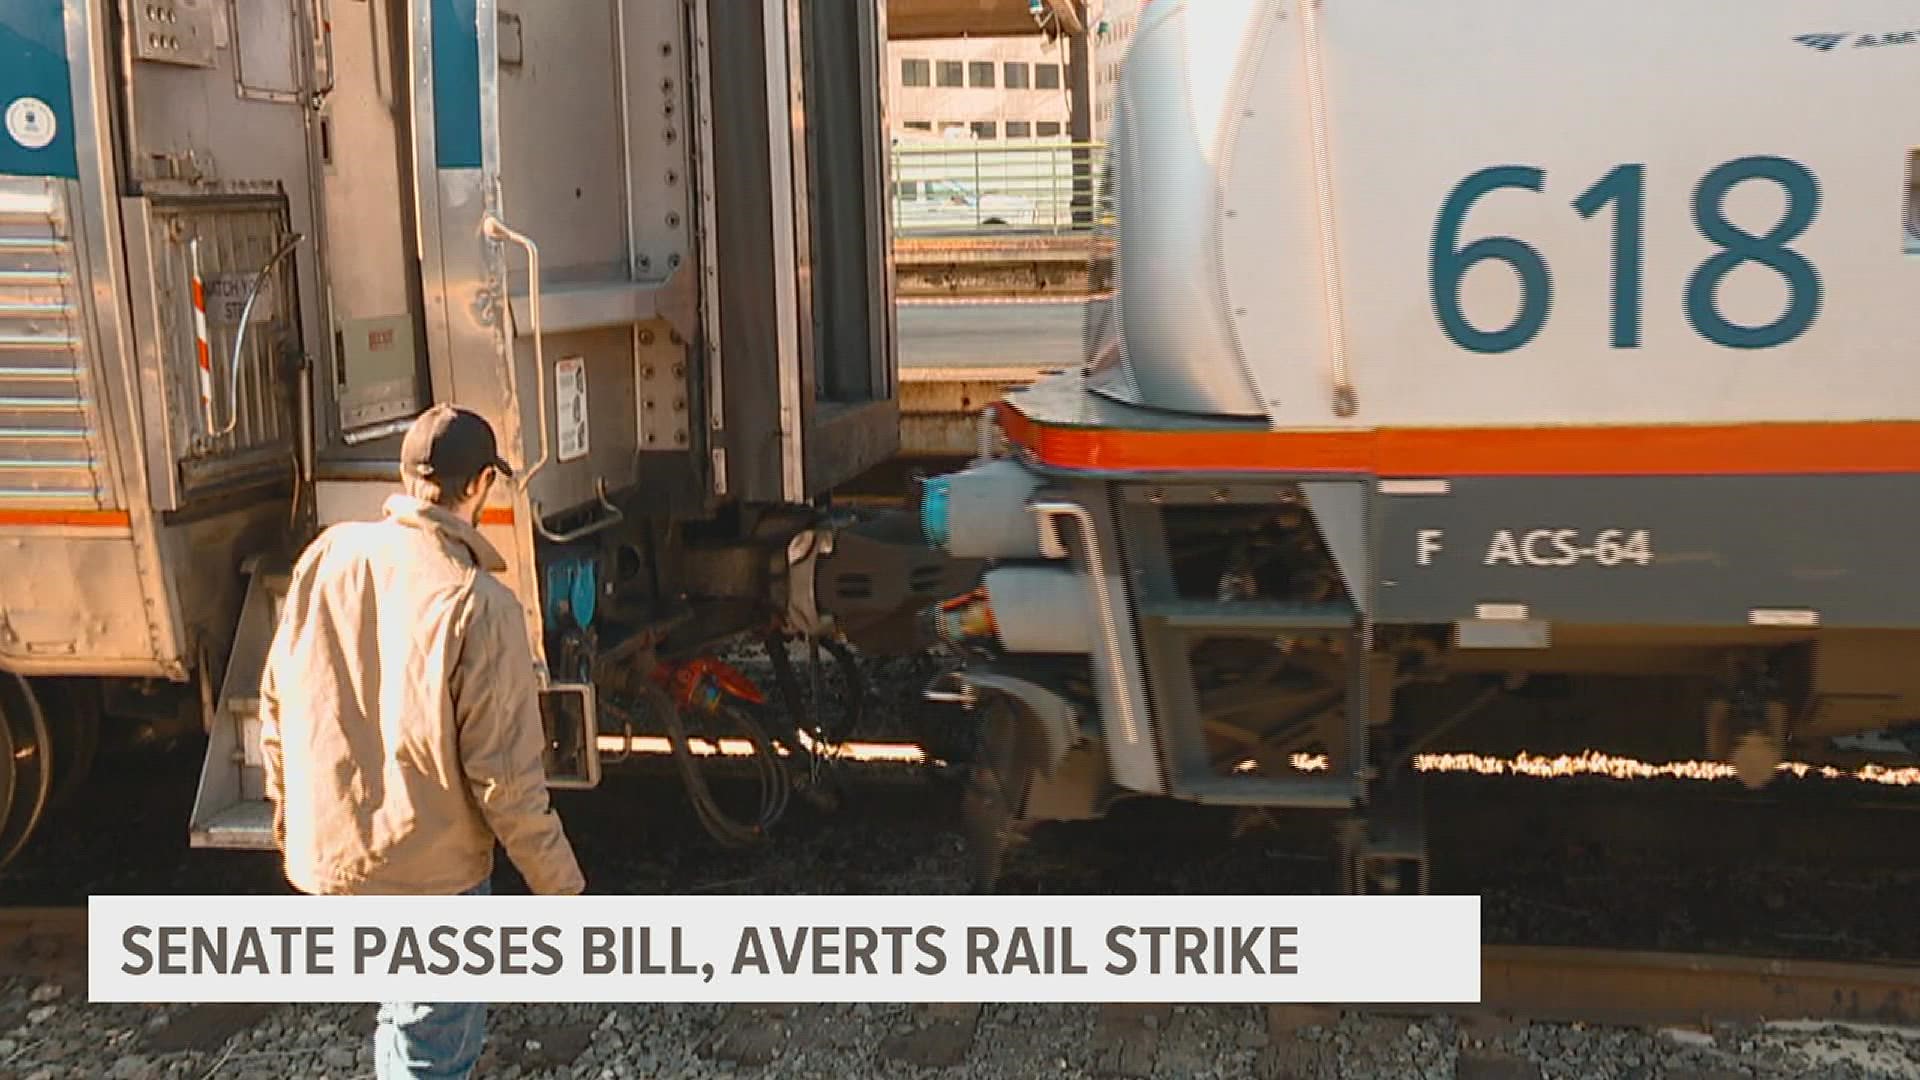 Railways say that halting rail service would cause a devastating $2 billion-per-day hit to the economy.